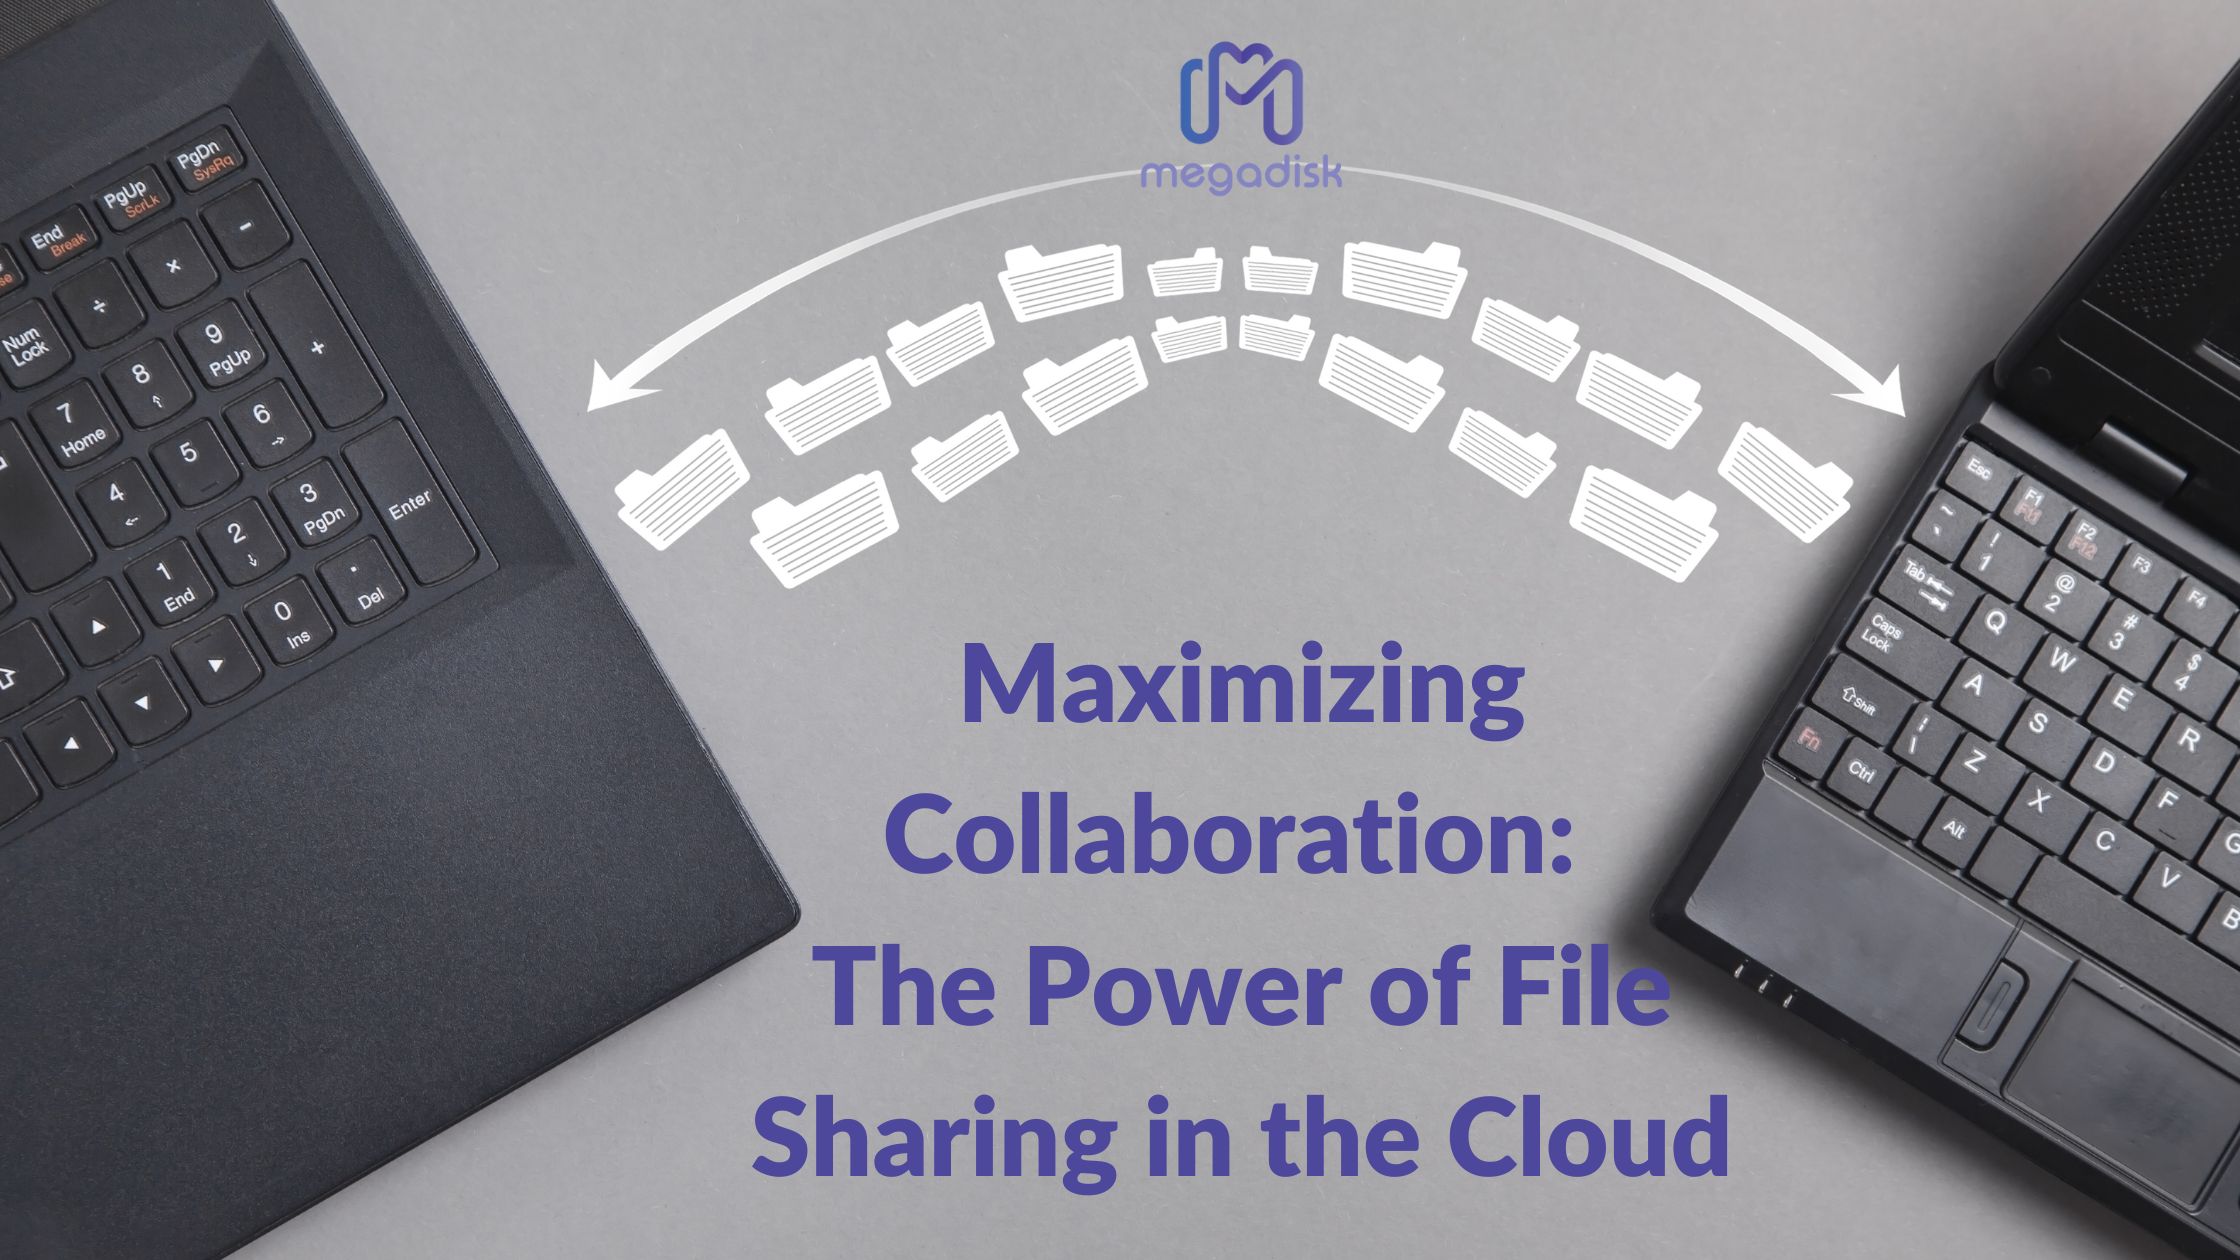 Maximizing Collaboration: The Power of File Sharing in the Cloud